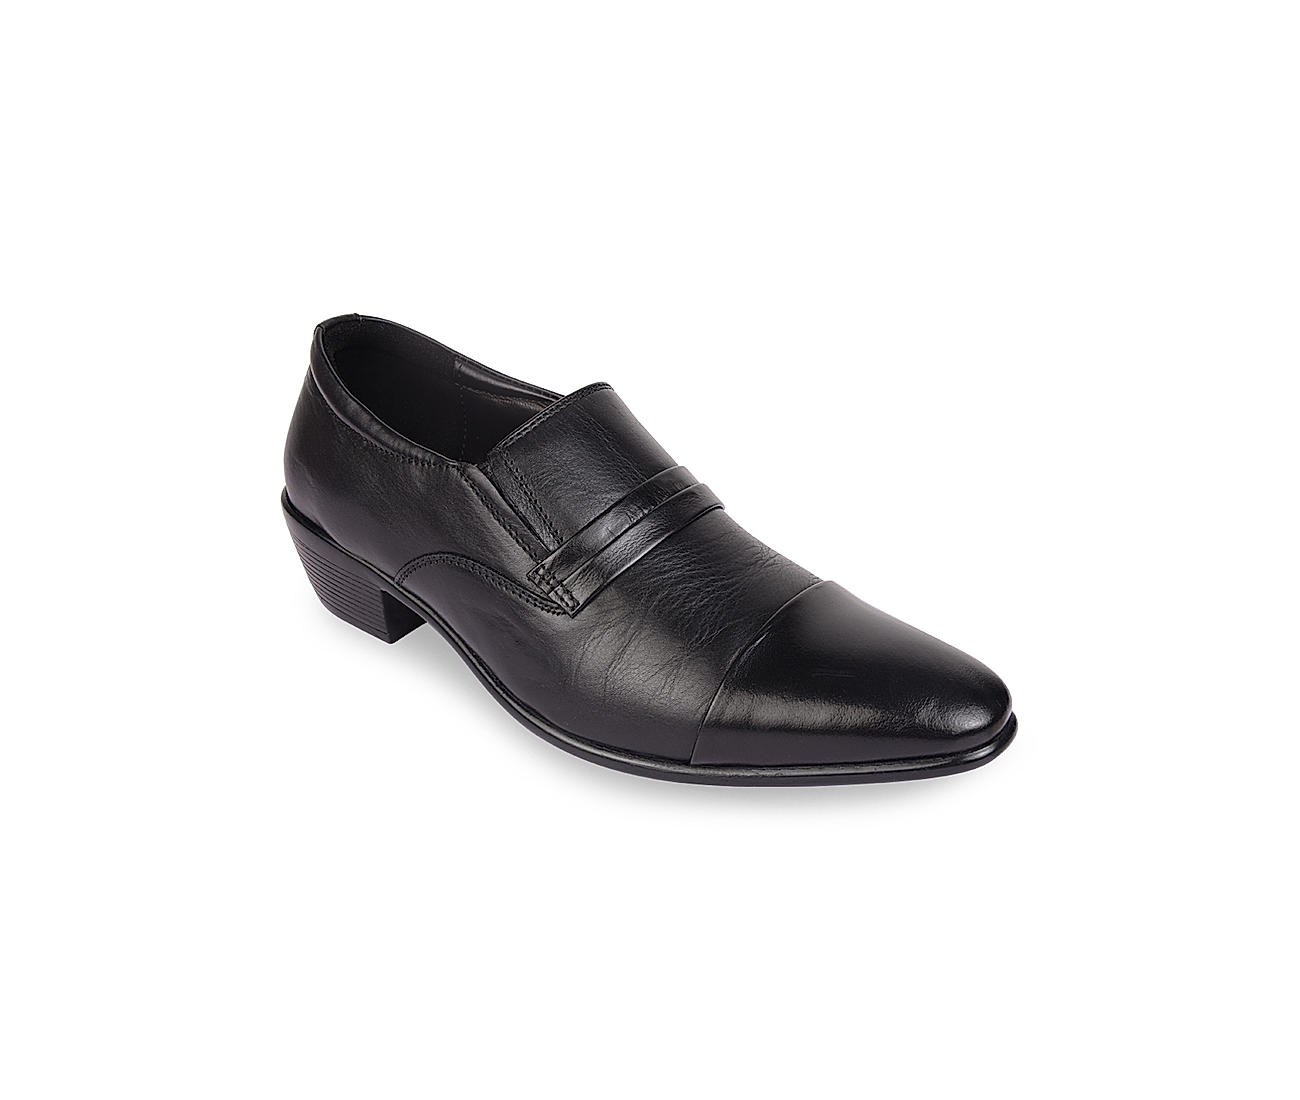 Handmade Genuine Leather Black Comfortable Formal Penny Loafers - Egleshoes